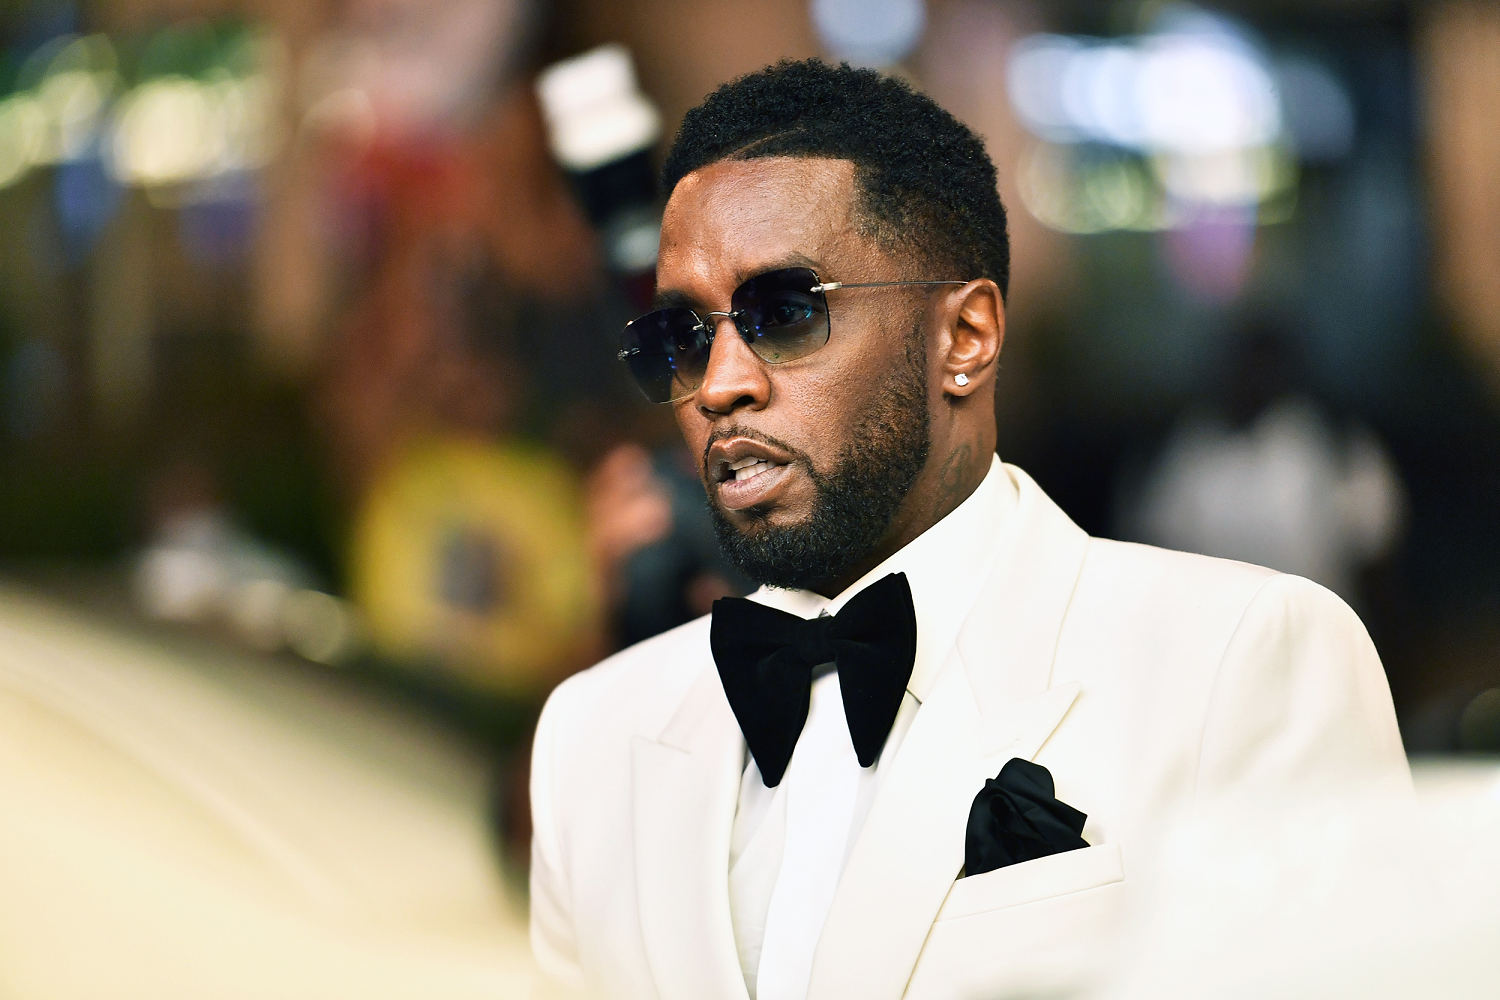 Sean ‘Diddy’ Combs steps aside as Revolt chairman amid sexual abuse lawsuits